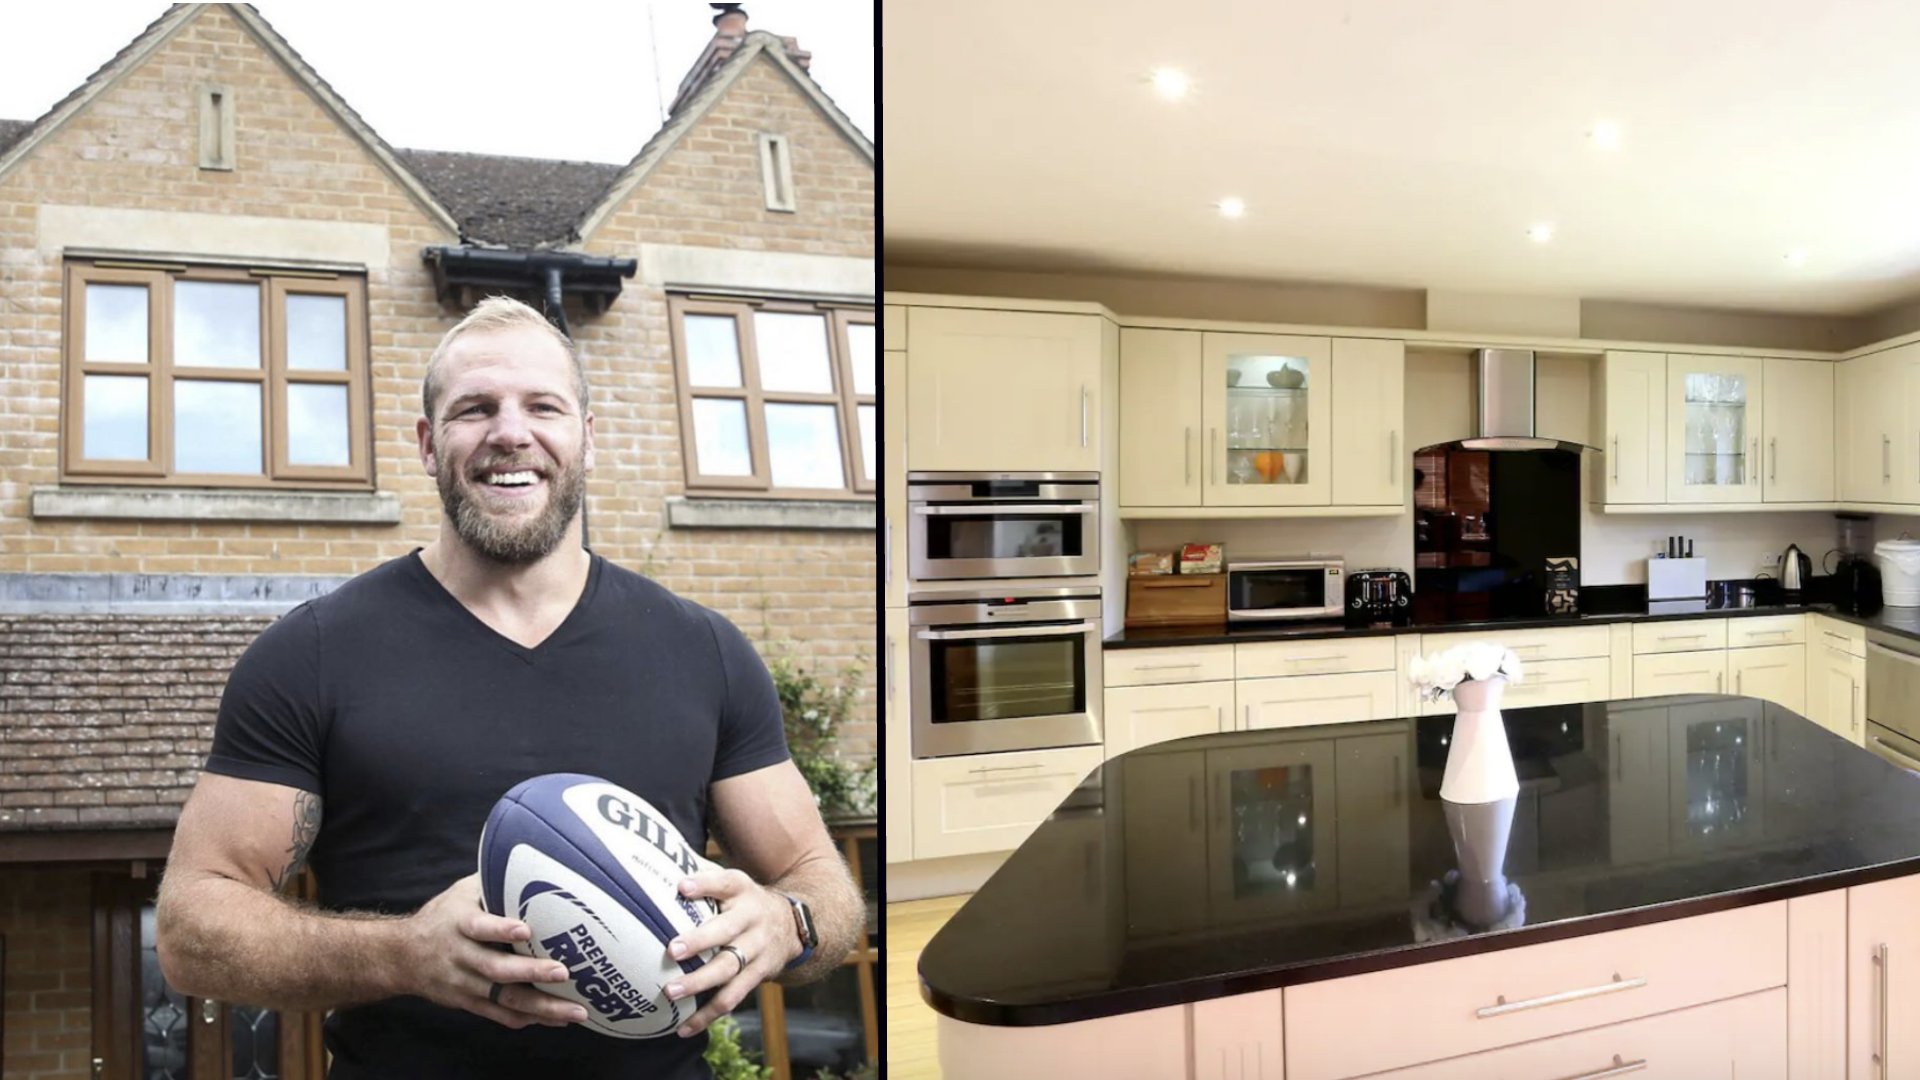 James Haskell is renting his house on Airbnb during the World Cup